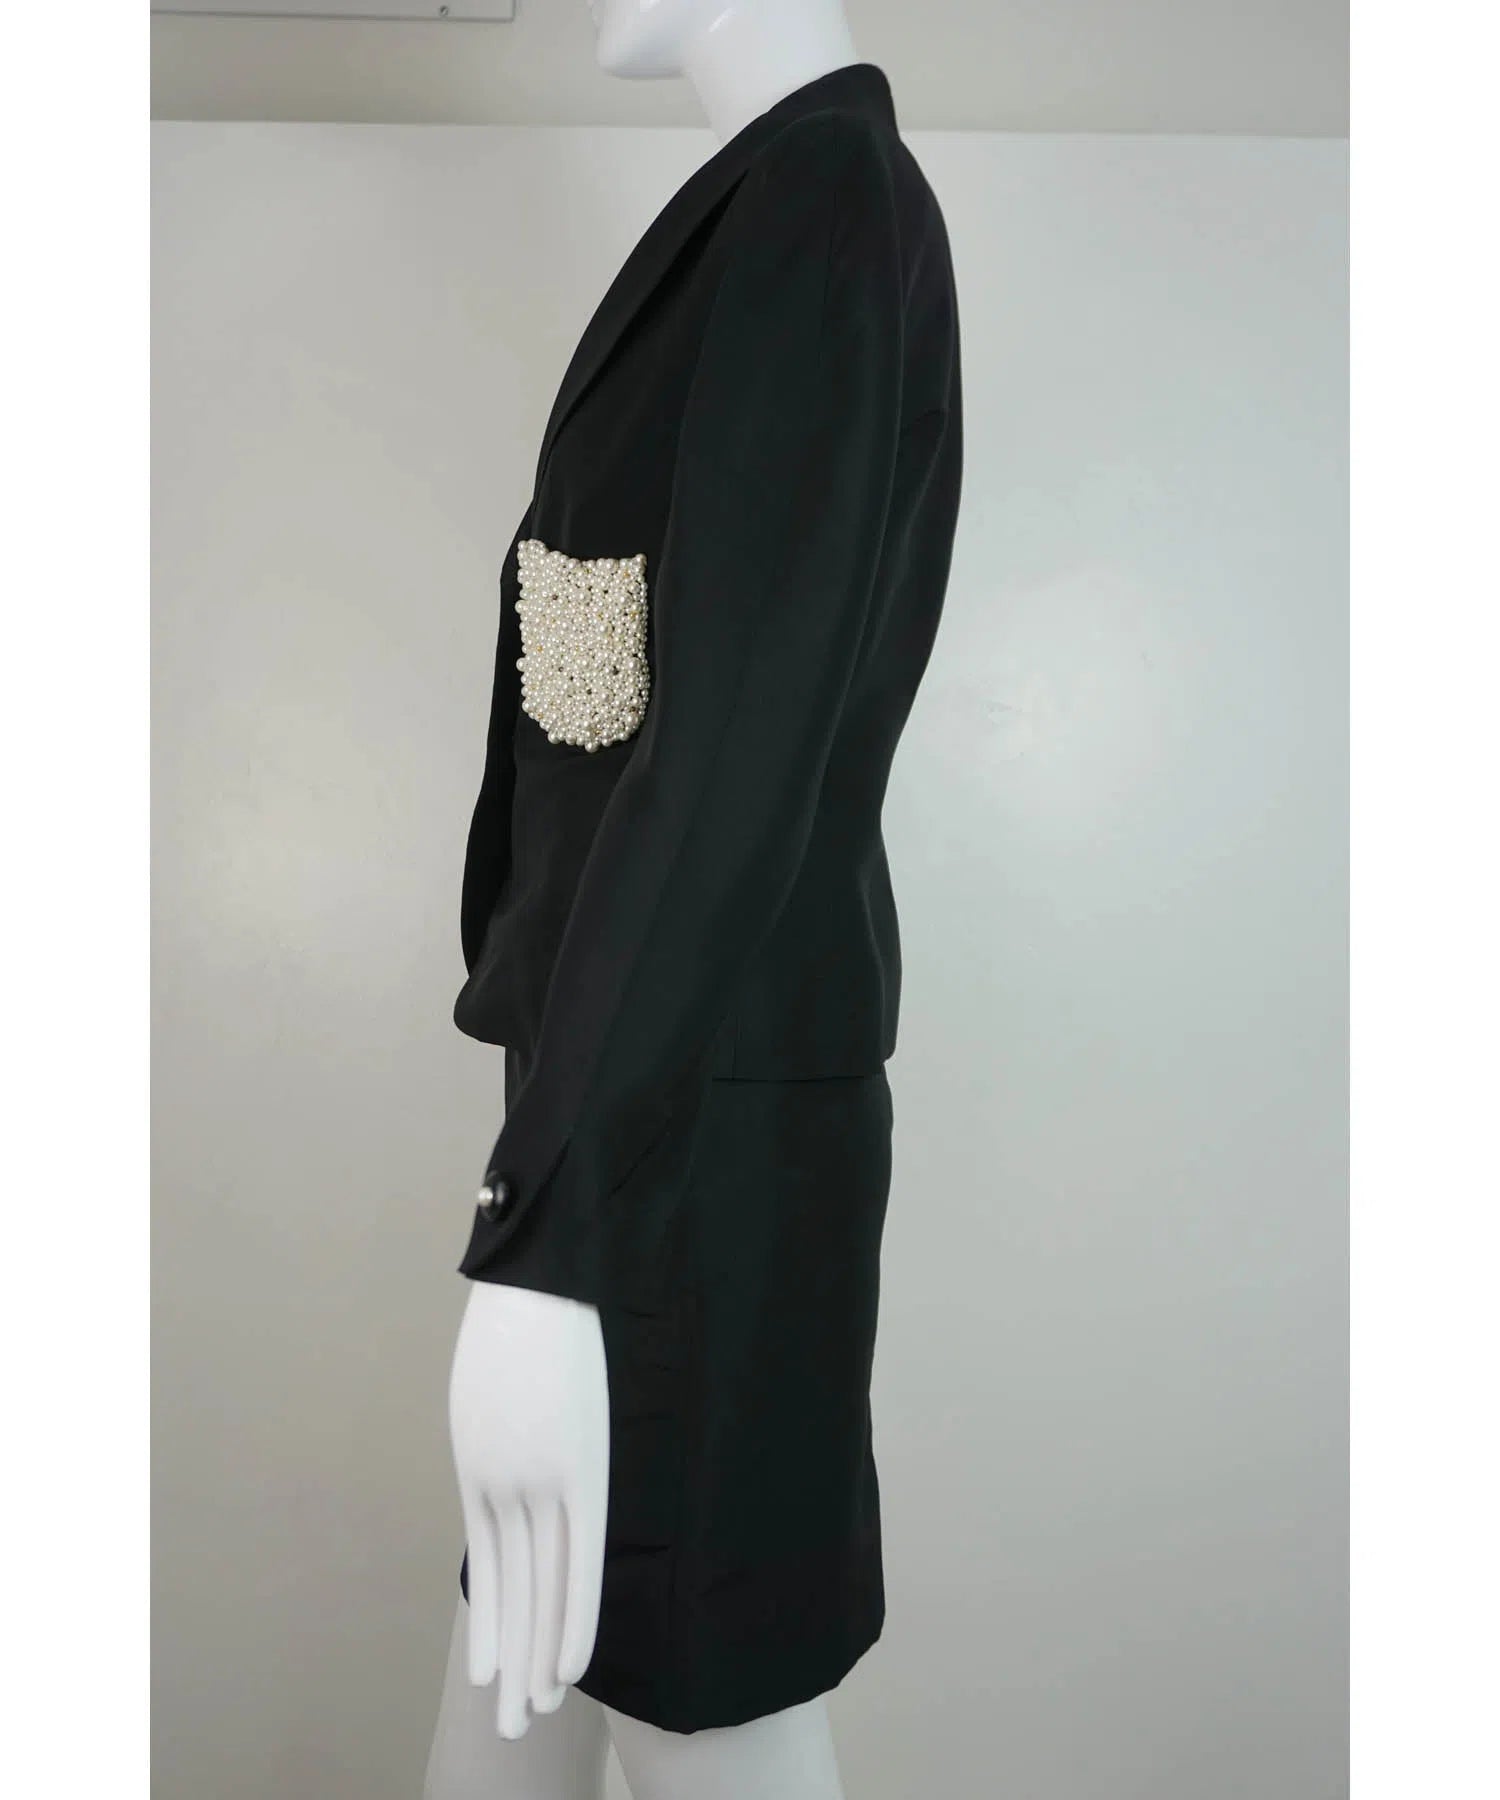 Chanel Pearl Pocket Jacket Suit 1980s - Foxy Couture Carmel